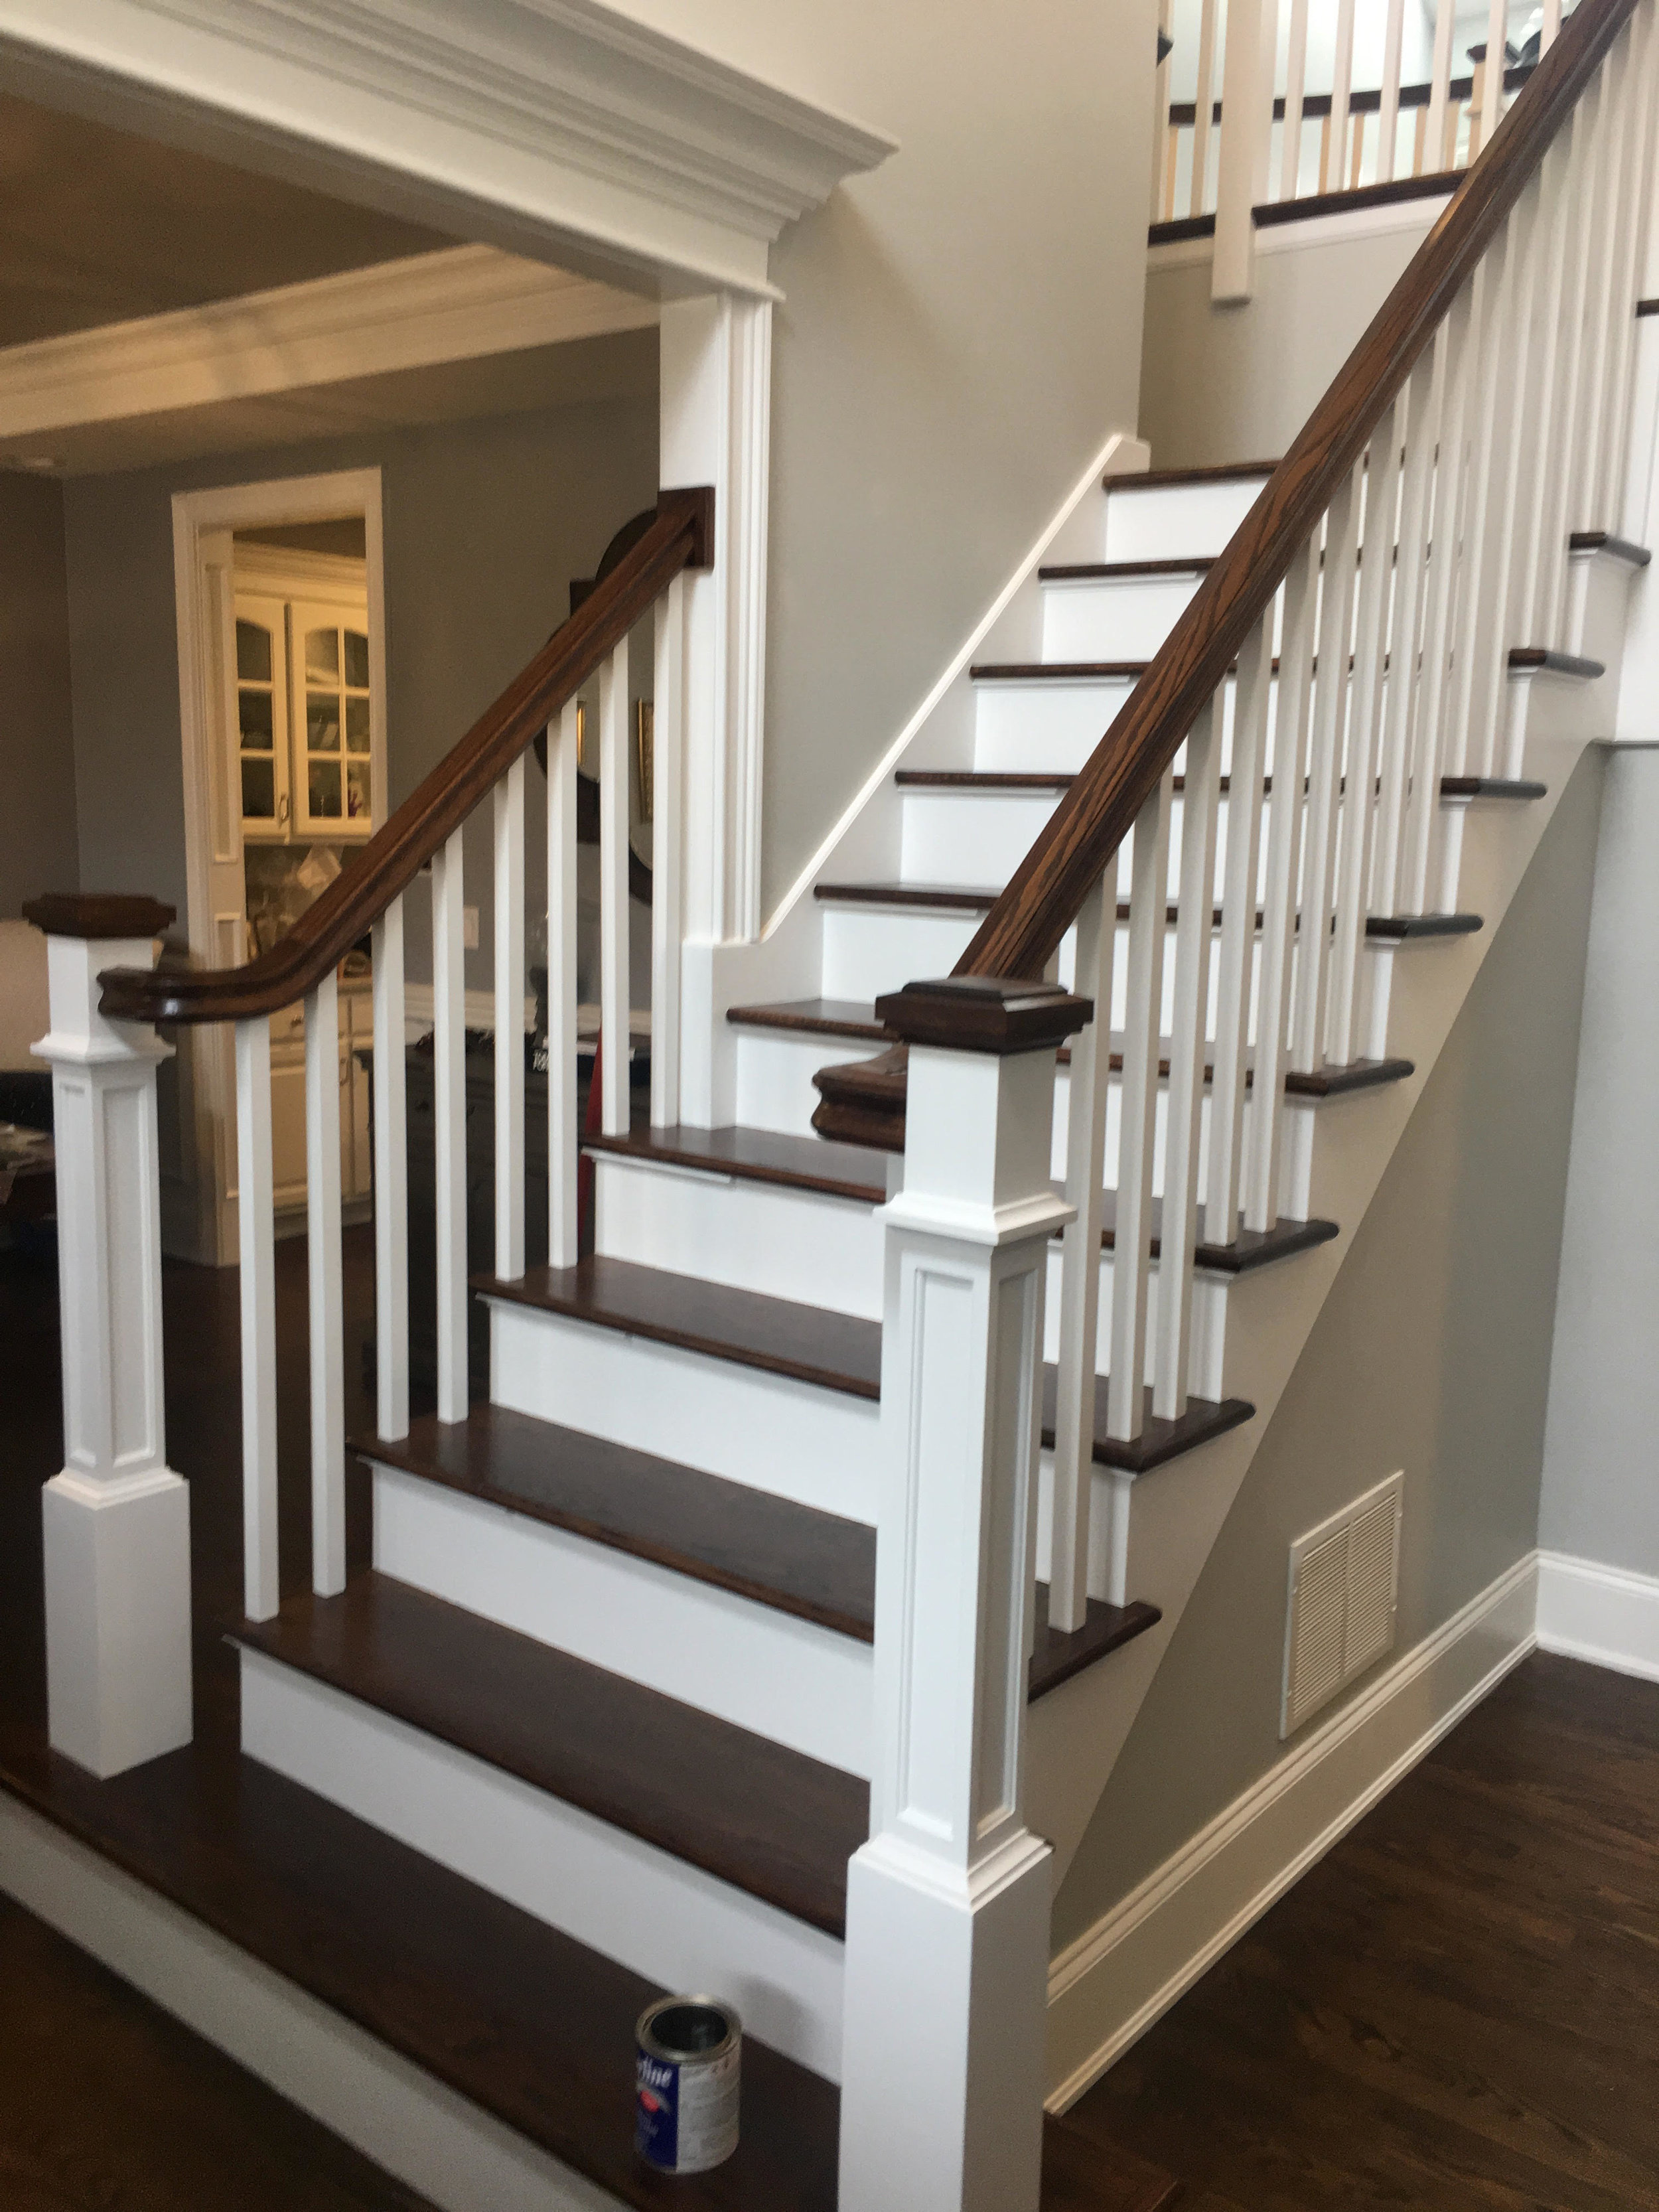 NAPERVILLE FOYER STAIR CASE REMODELING &amp; UPDATING